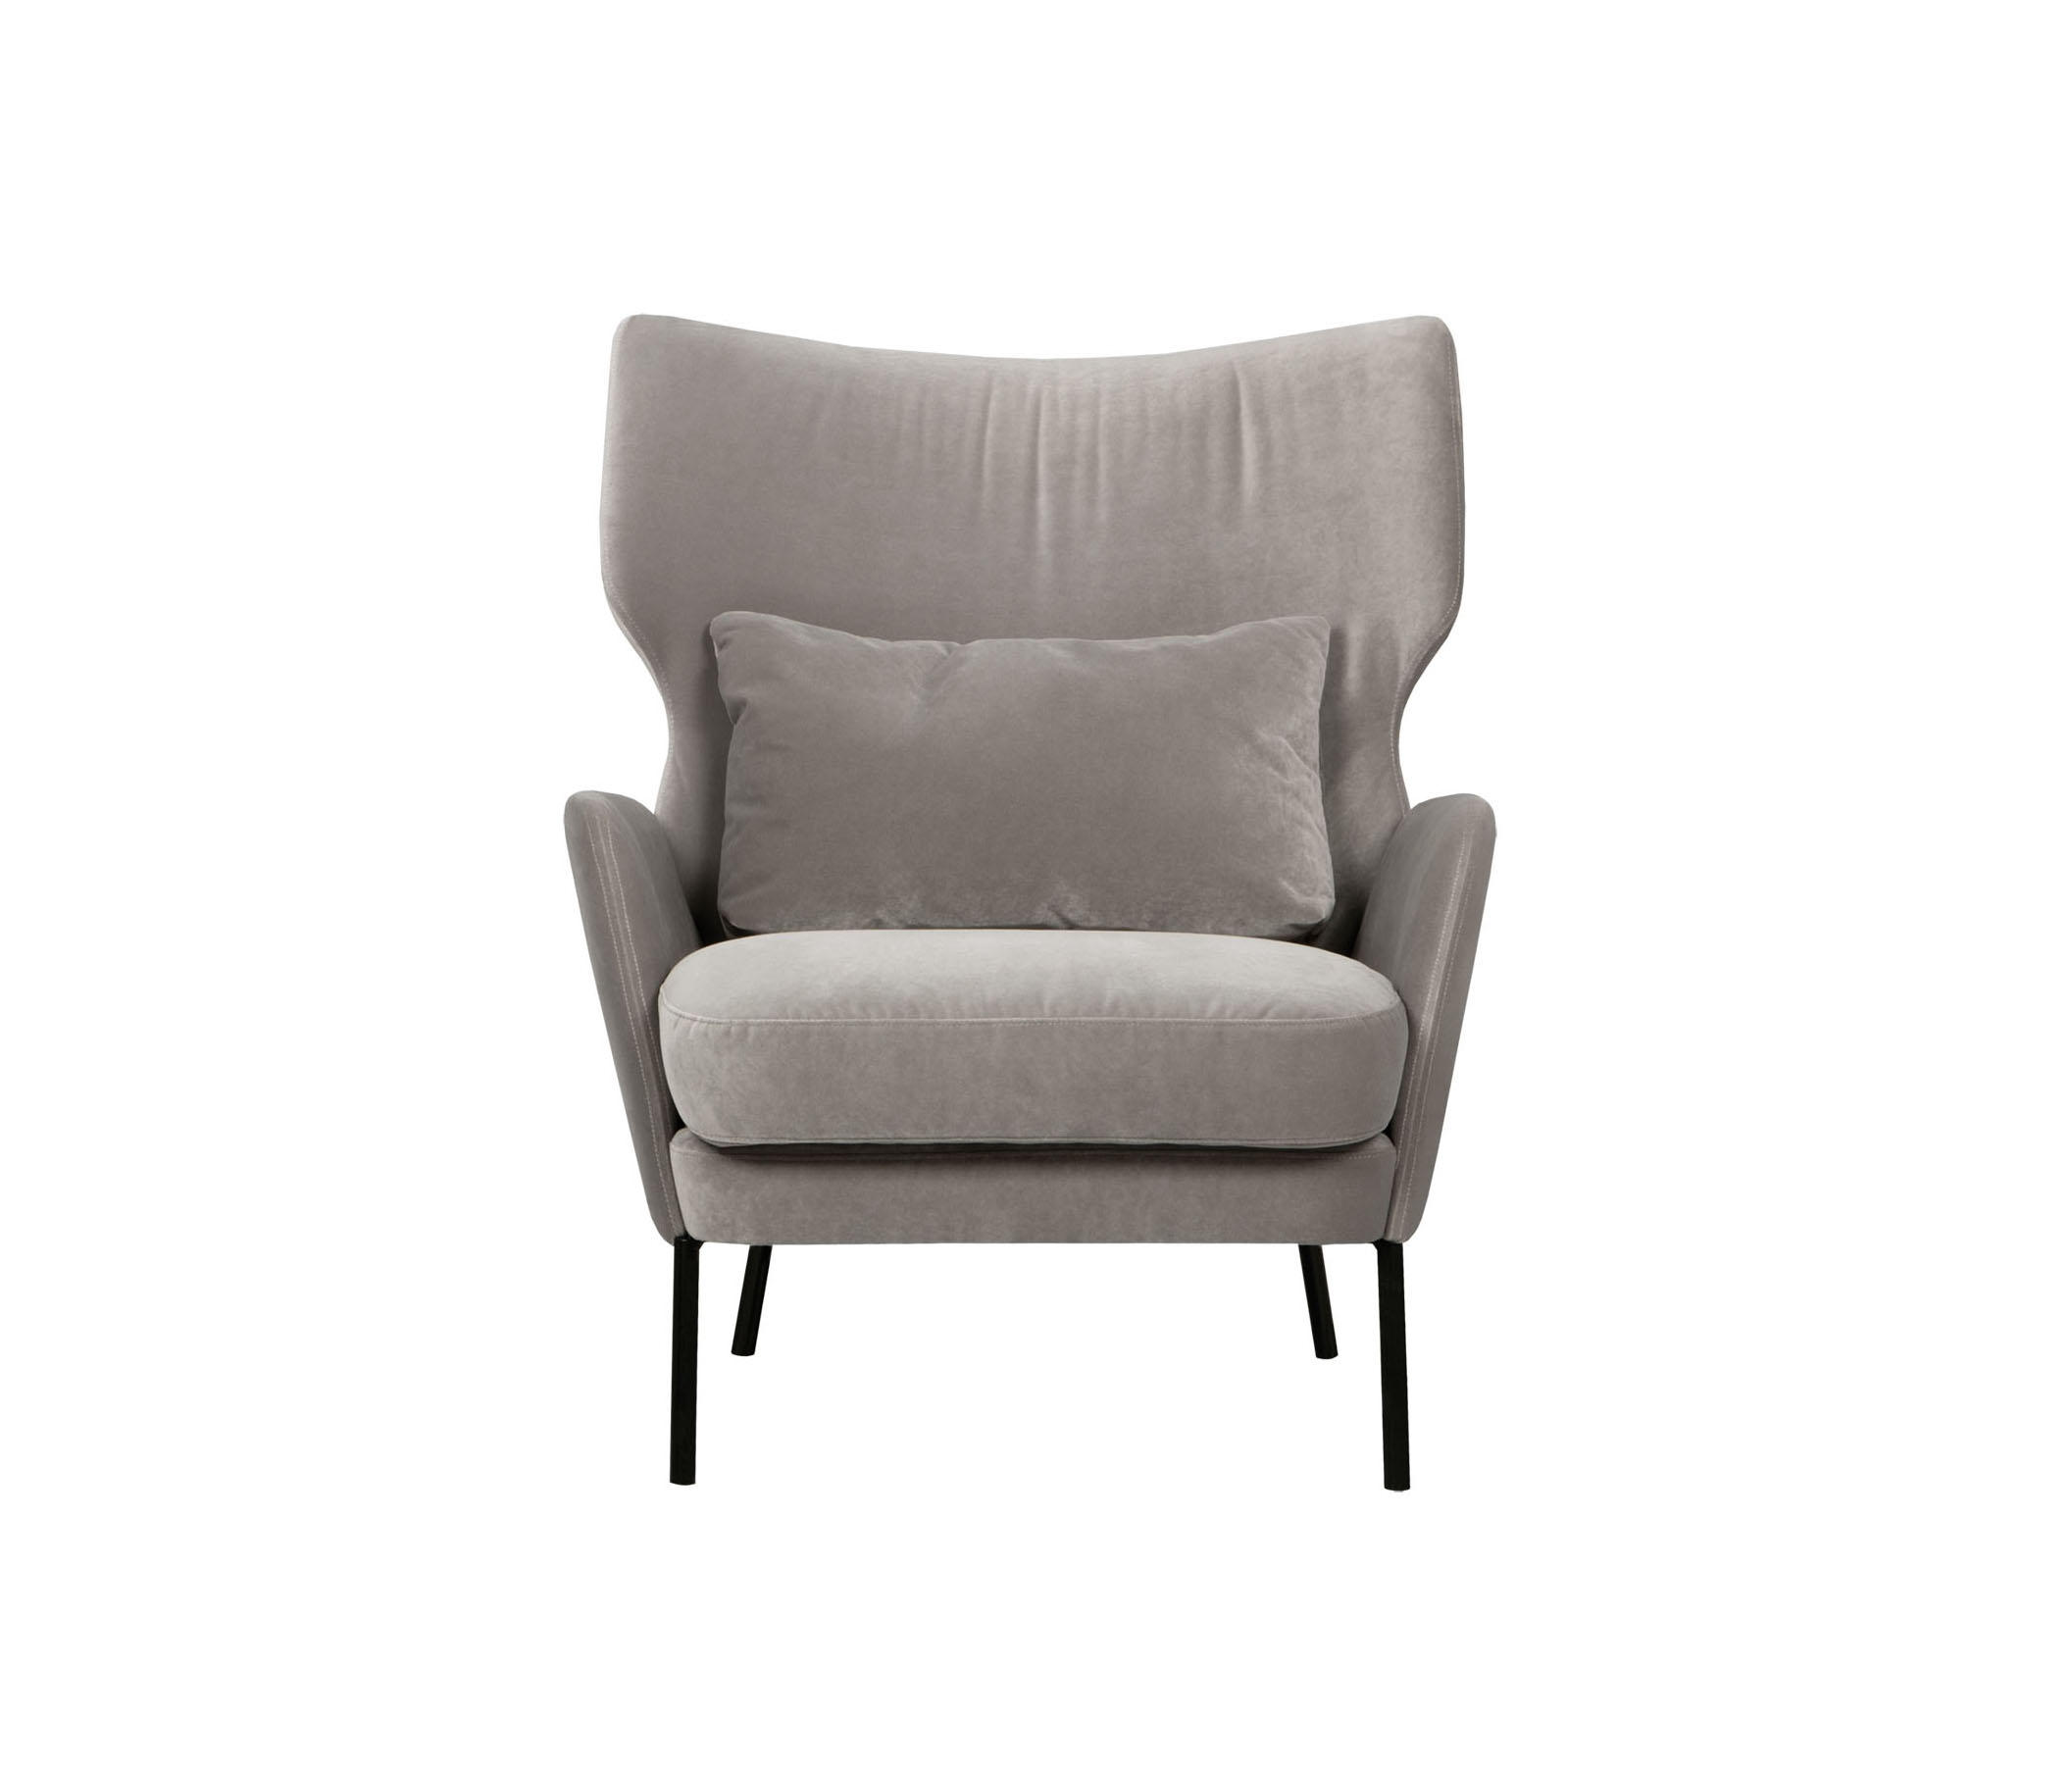 ALEX - Armchairs from SITS | Architonic